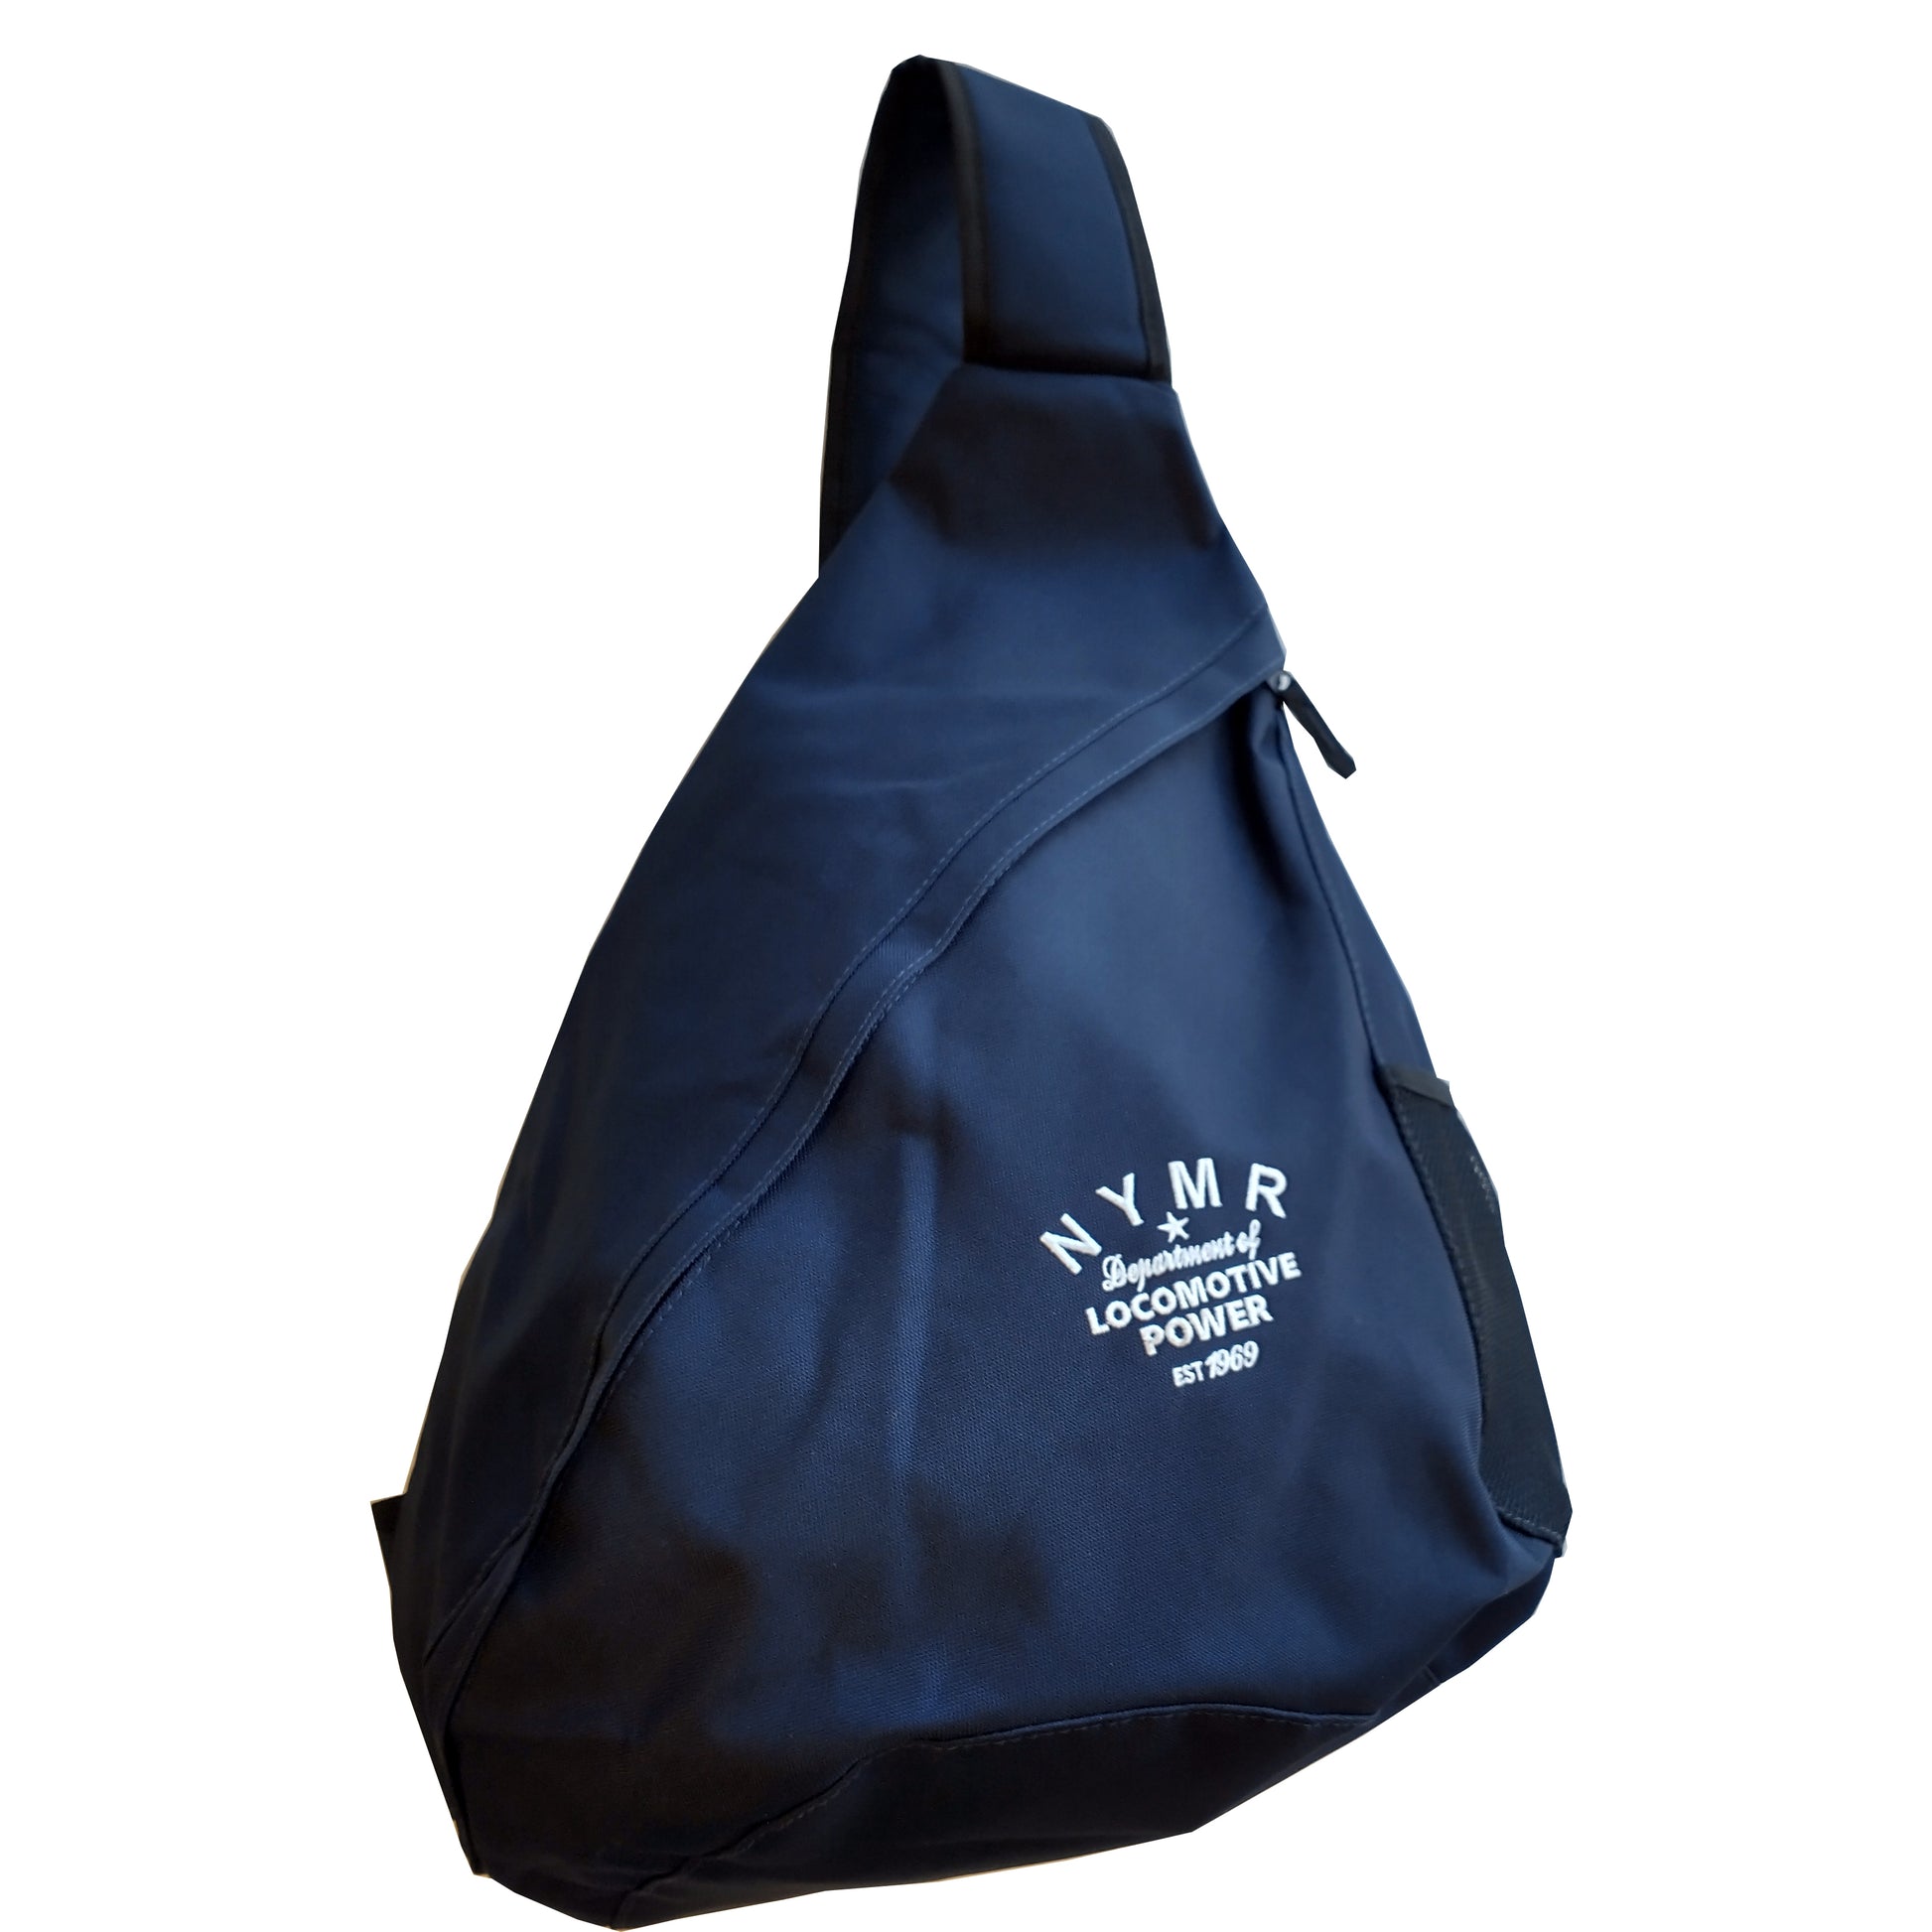 Navy blue mono strap bag with zip and mesh pocket. N Y M R Locomotive Power logo in white on side.